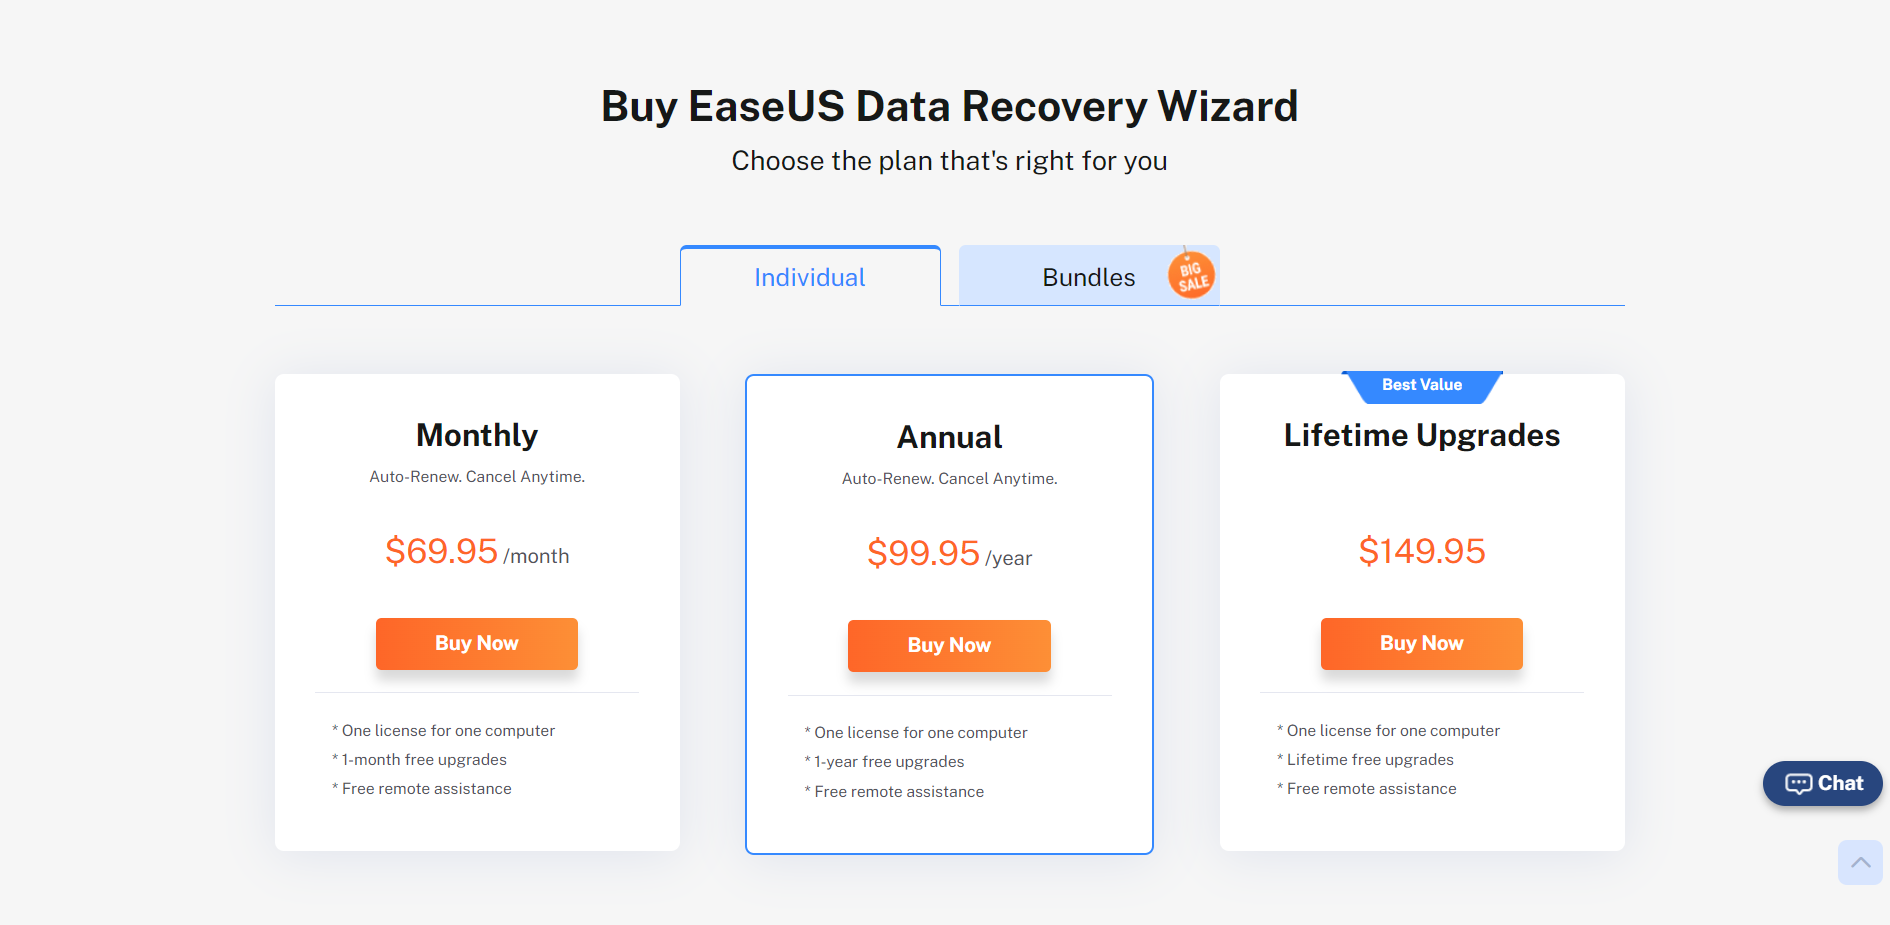 EaseUS Data Recovery Wizard Pricing